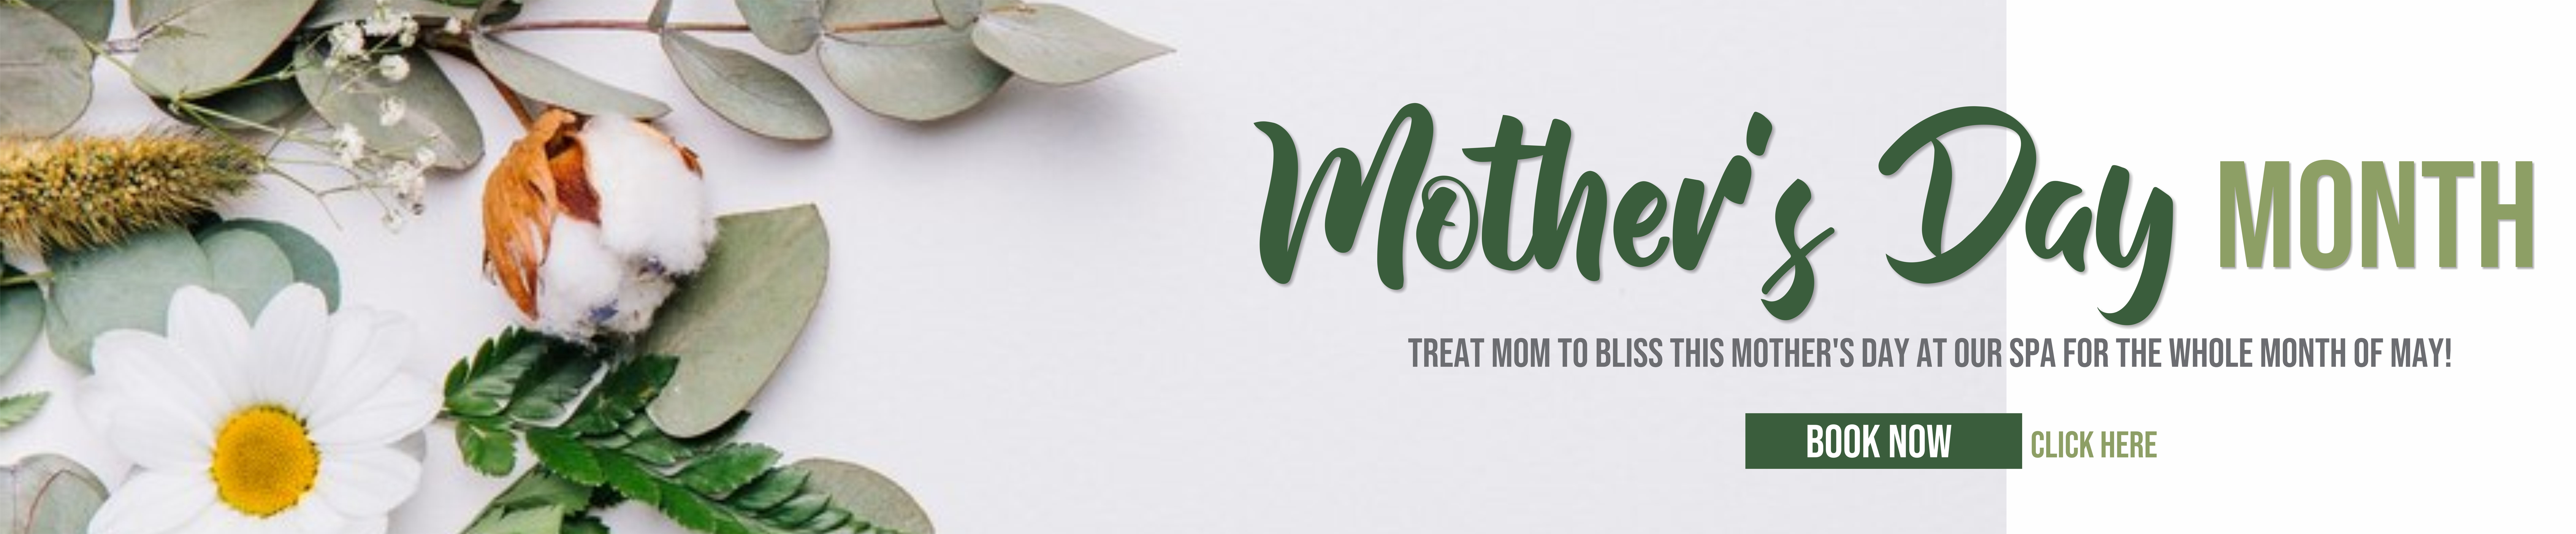 Spa in the Country Mothers Day Treatment Packages for Spas in Gauteng & Rustenburg